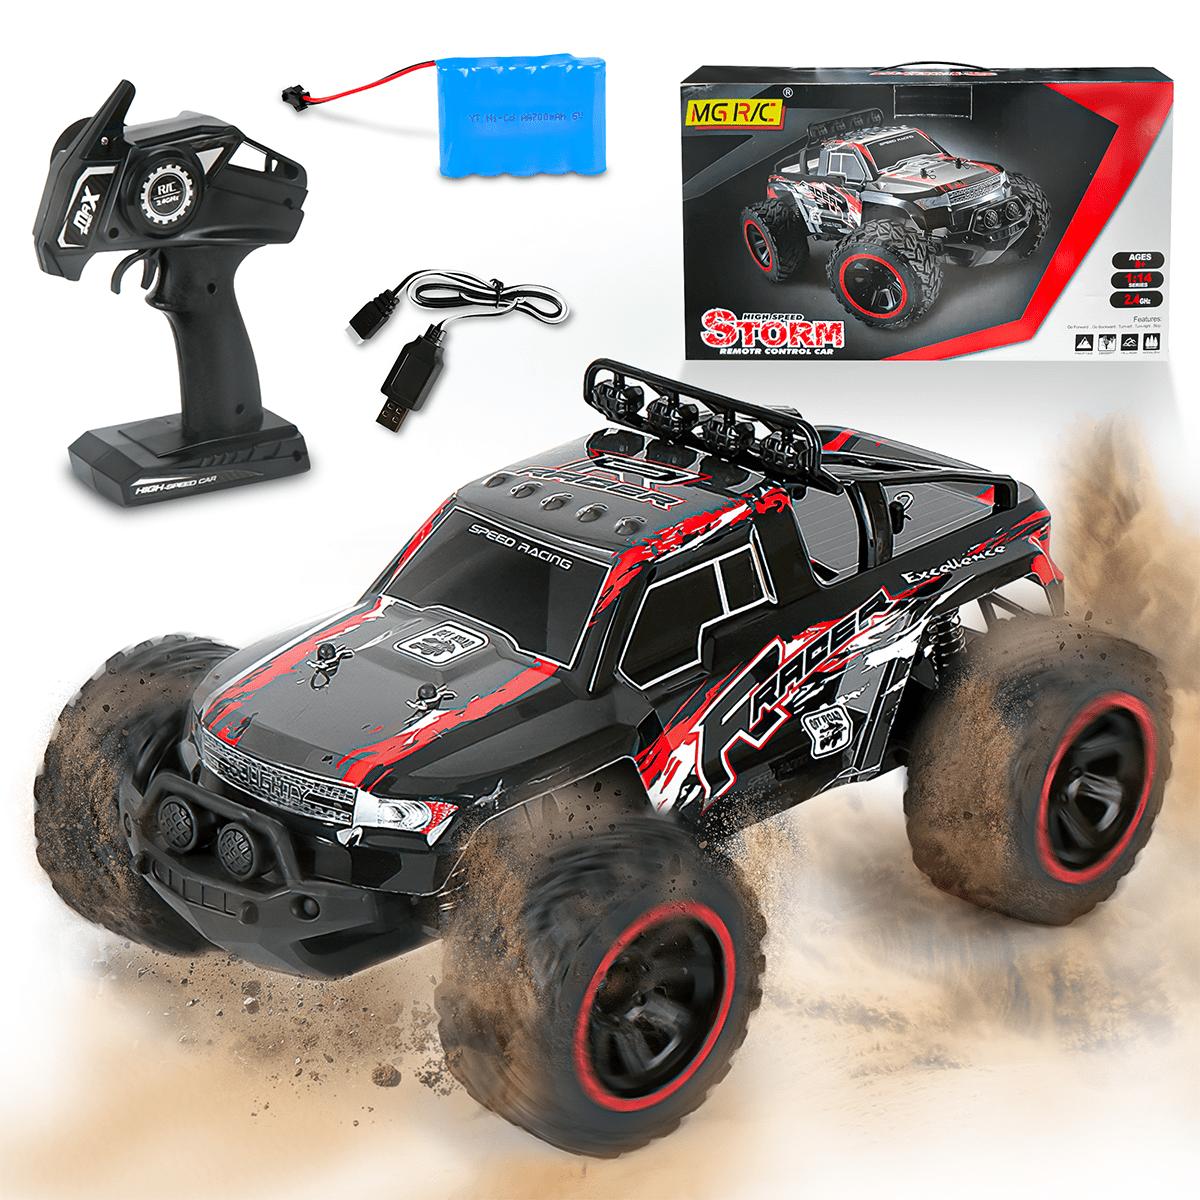 4 4 Remote Control Car: High-speed, durable, and customizable: The 4 4 remote control car has it all.